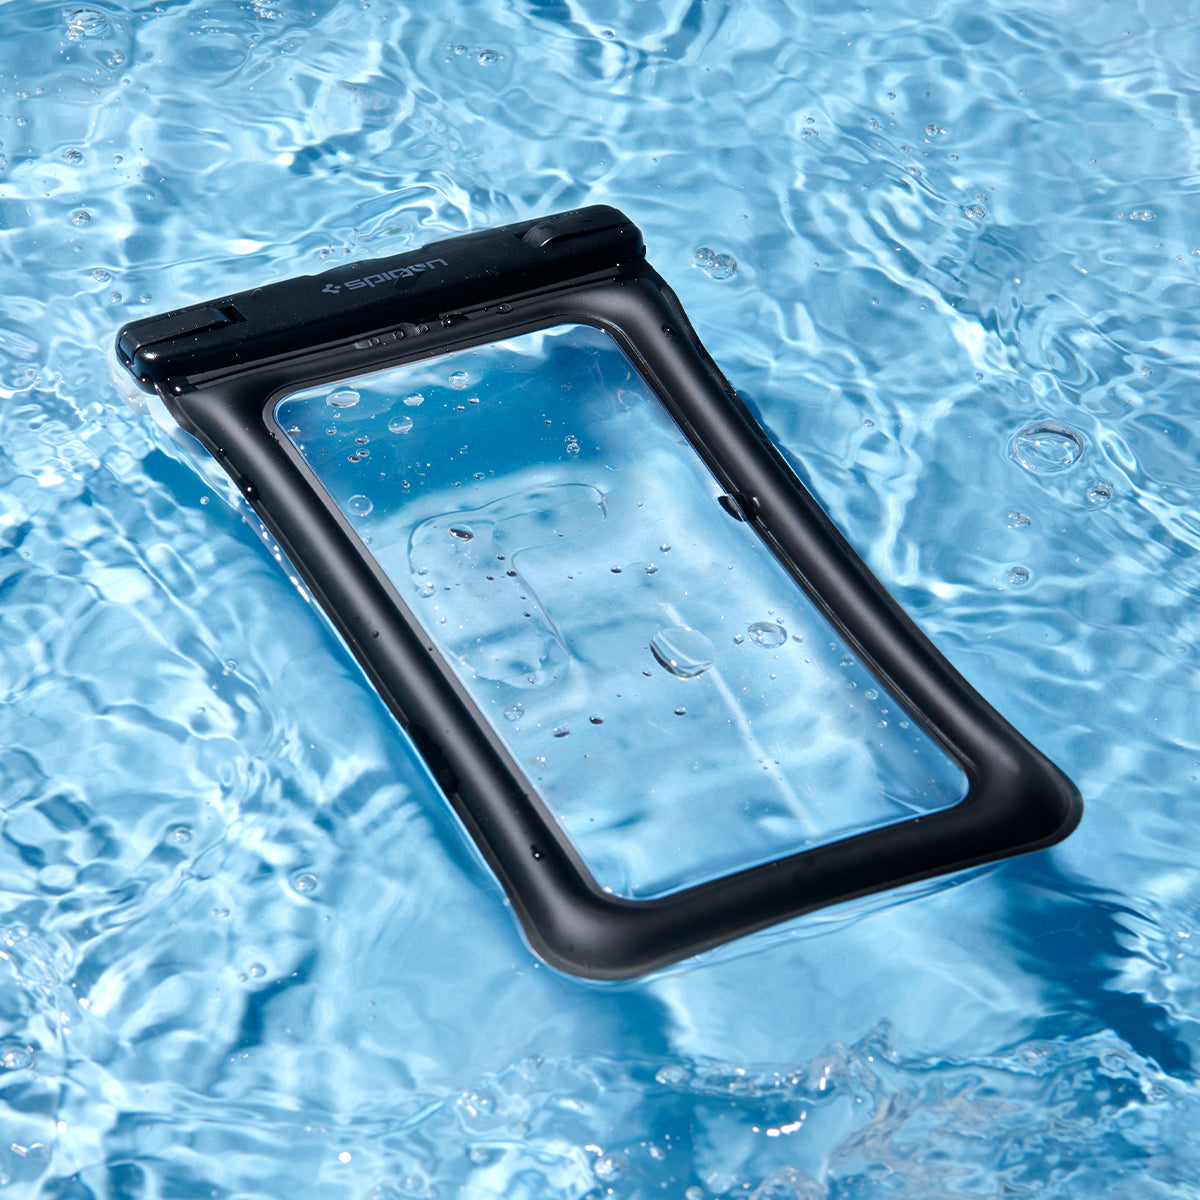 AMP04529 - AquaShield Waterproof Floating Case A610 in Black showing the front of the waterproof case floating on the surface of the water